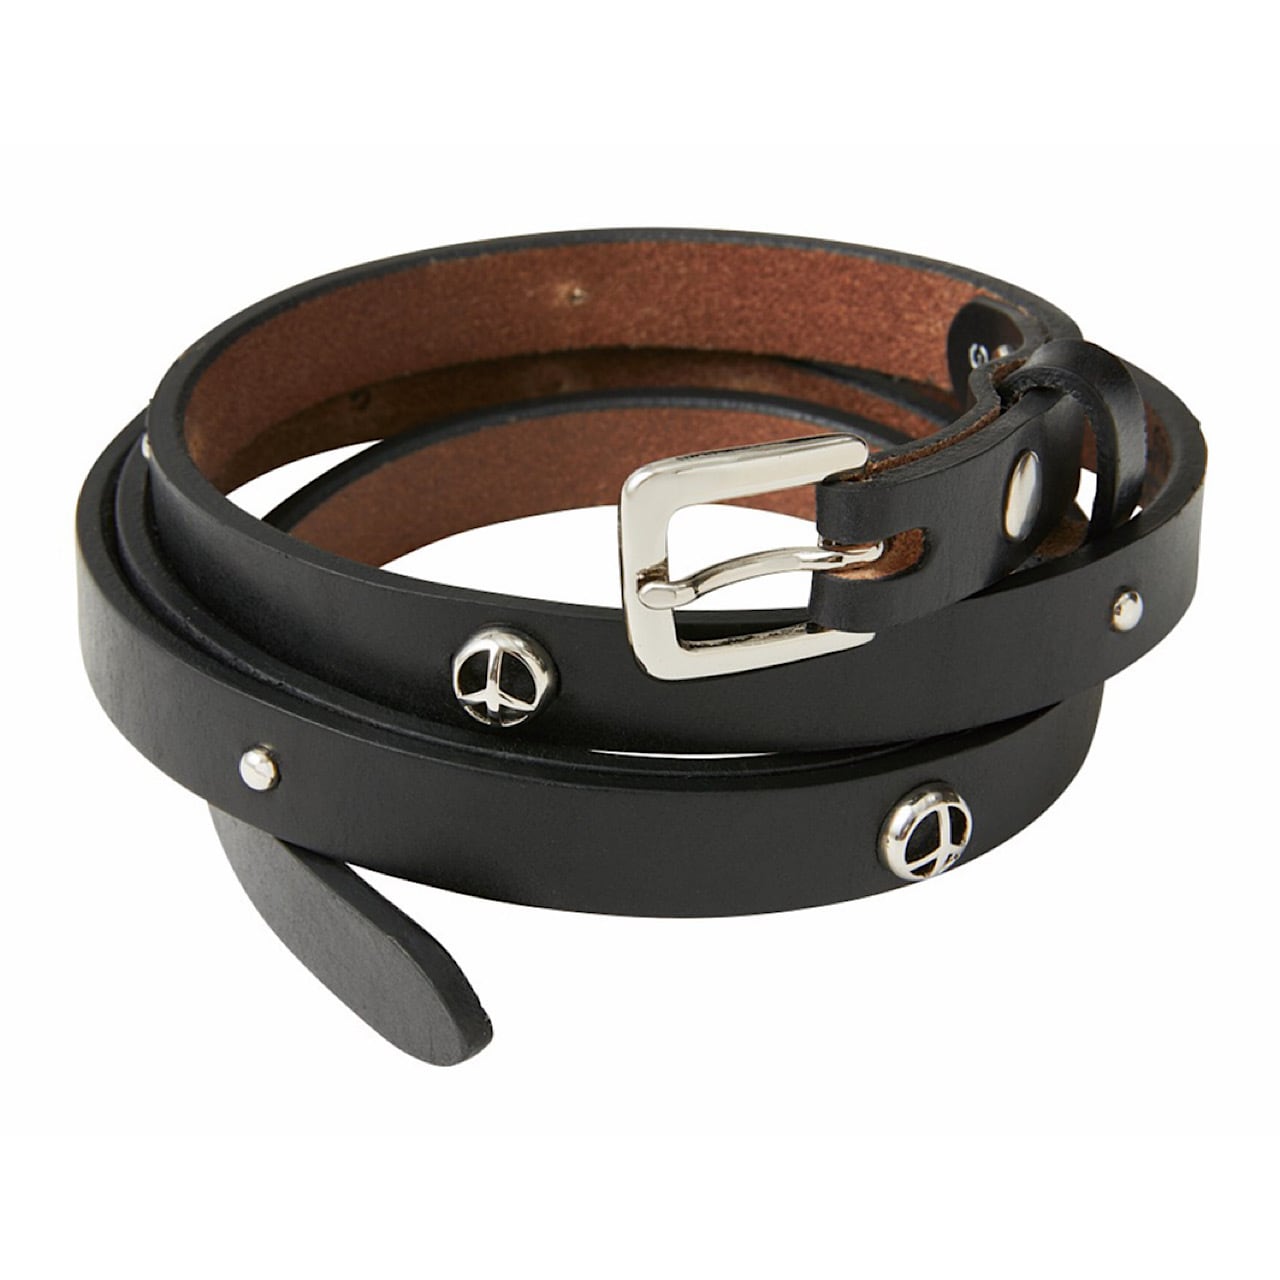 PORTER CLASSIC / WOLF'S HEAD PEACE BELT mm   OFFICIAL